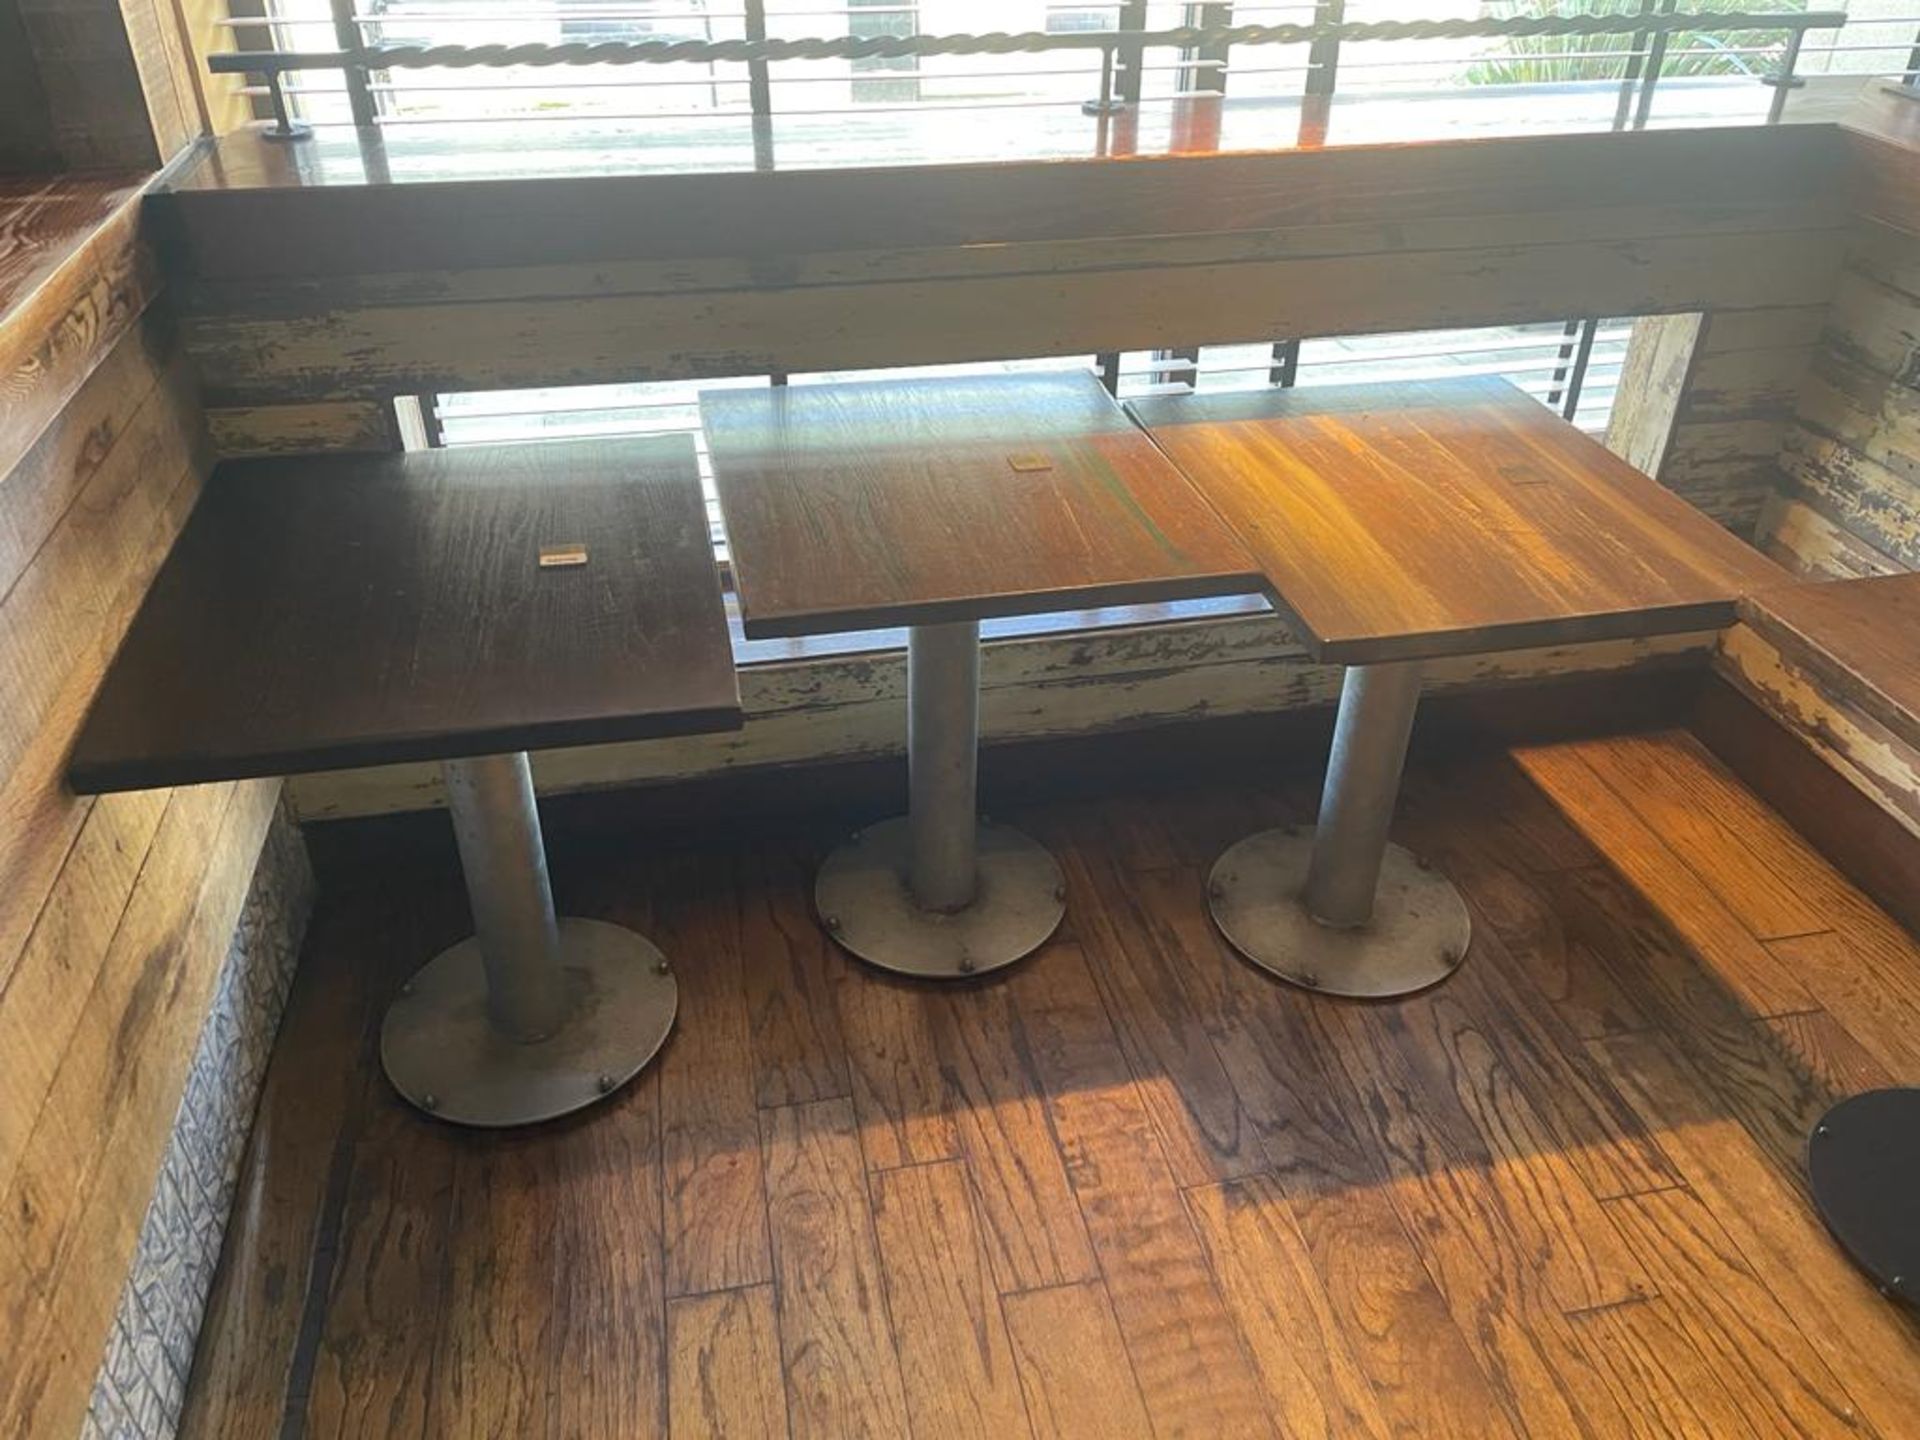 4 x Restaurant Dining Tables Featuring Industrial Style Bases and Wood Tops - Dimensions: H73 x - Image 8 of 9